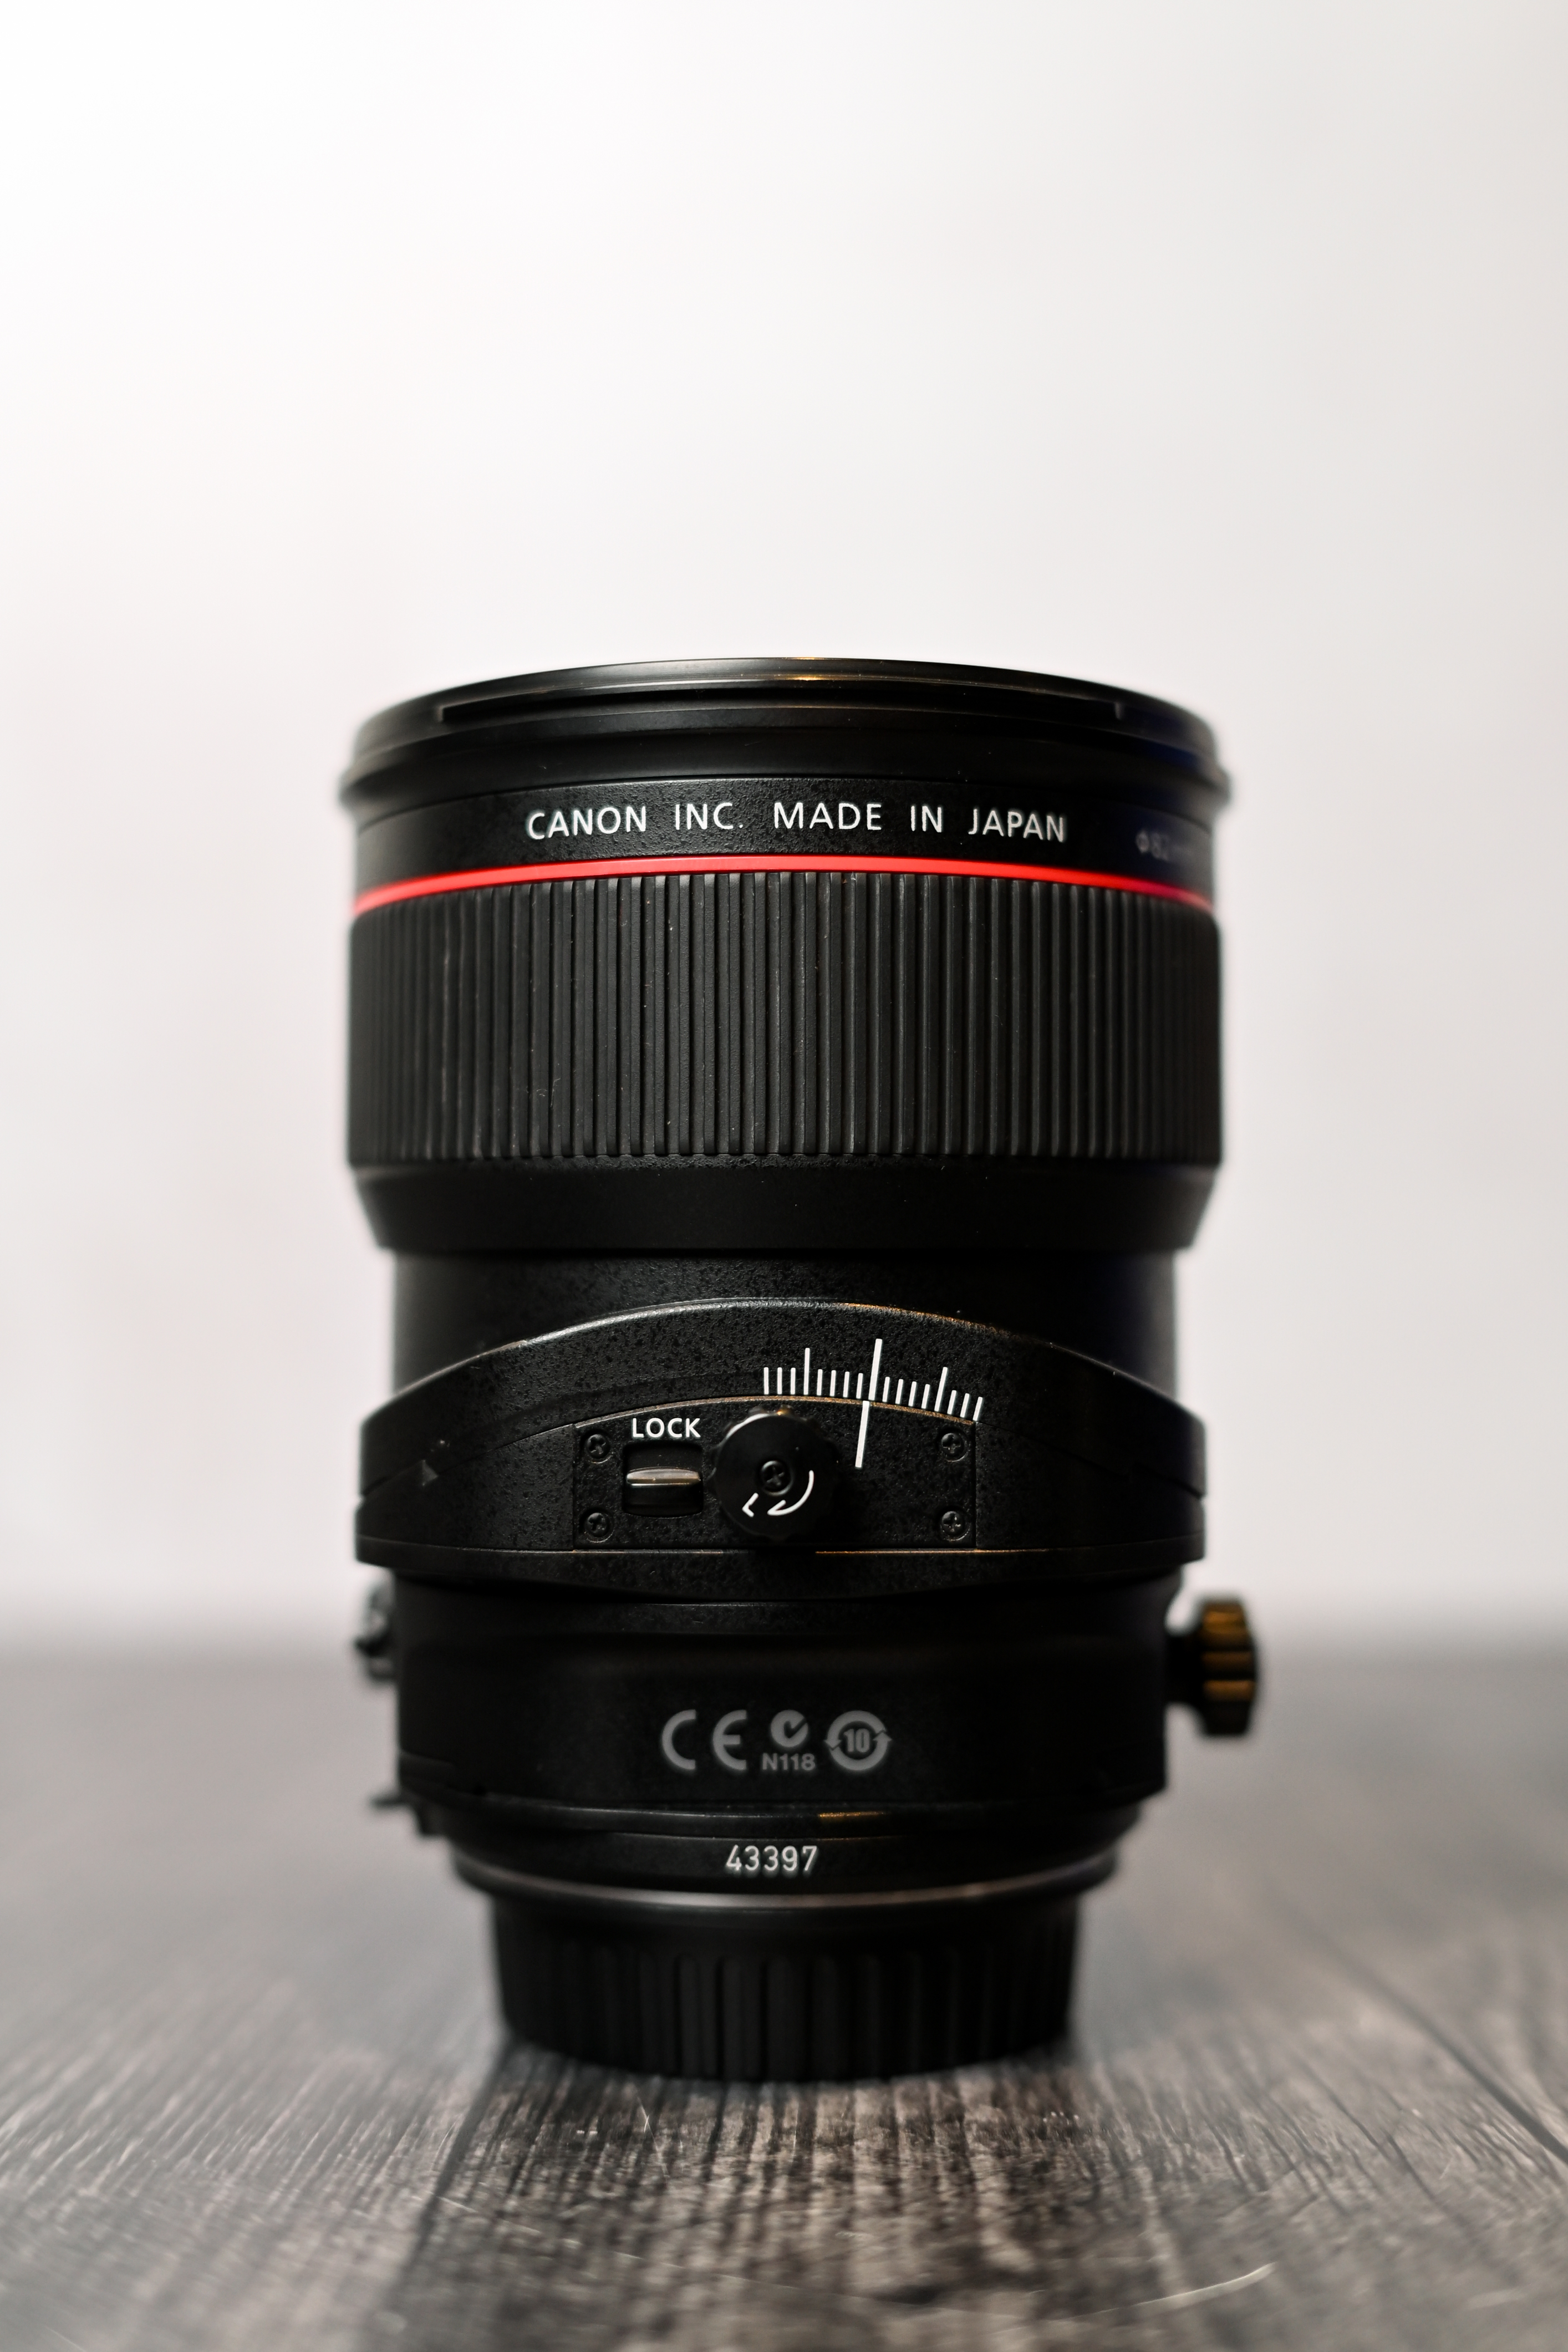 Used Canon TS-E 24mm f/3.5L II Tilt Shift Lens From Focal Point ...